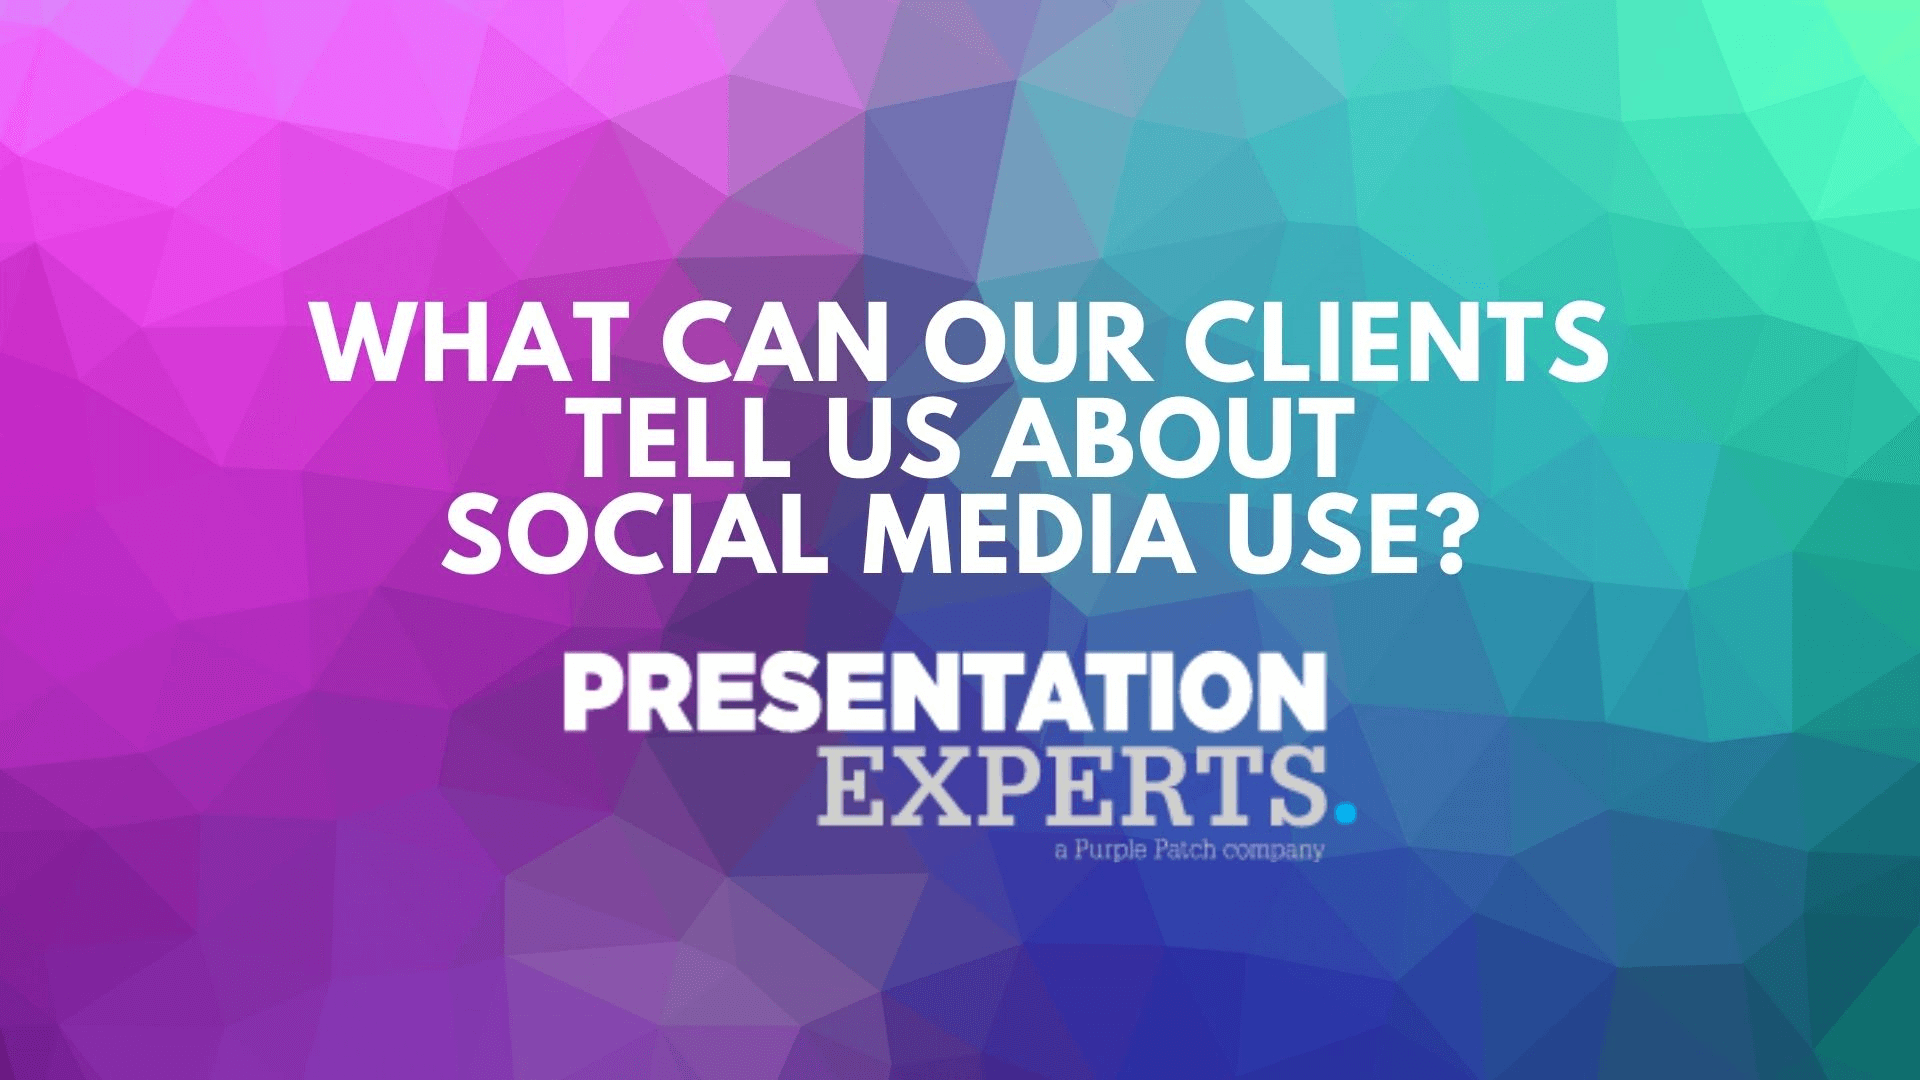 What can our clients tell us about social media use?